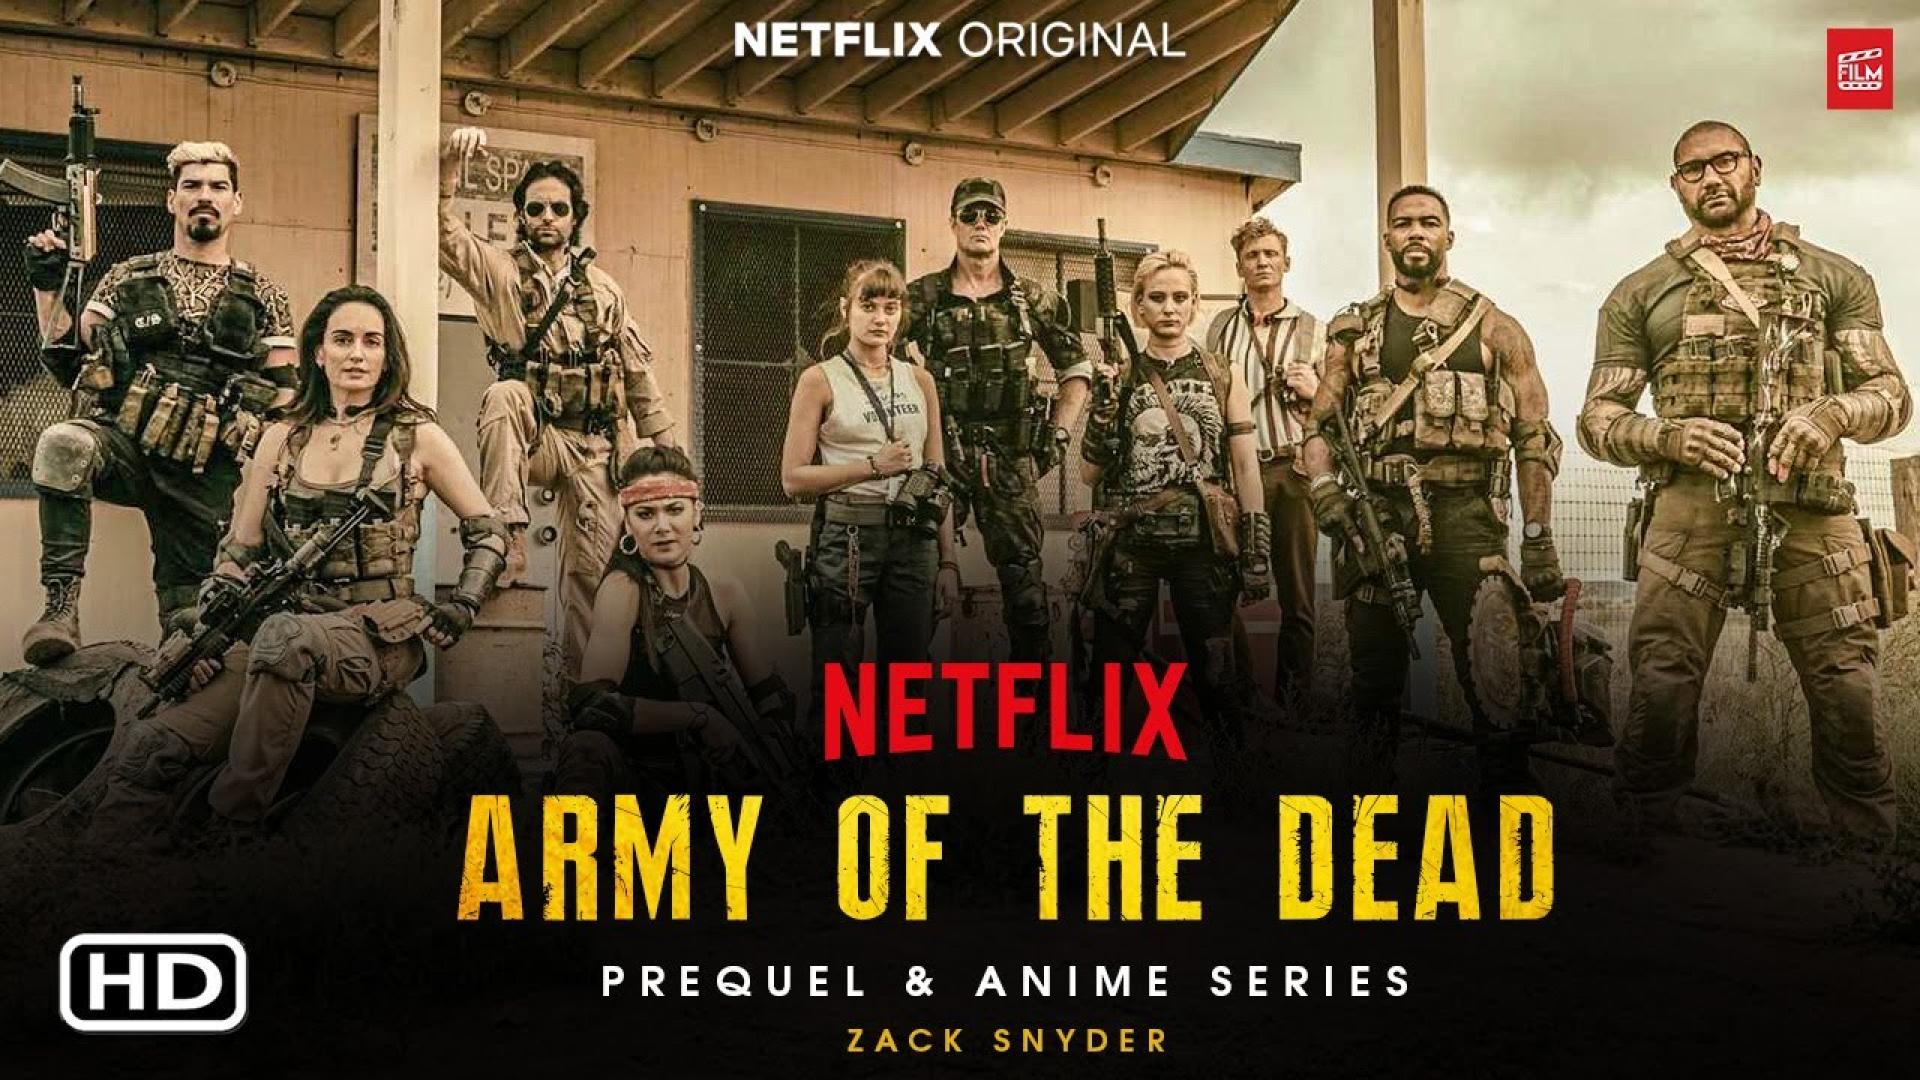 Trailer: Army of the Dead